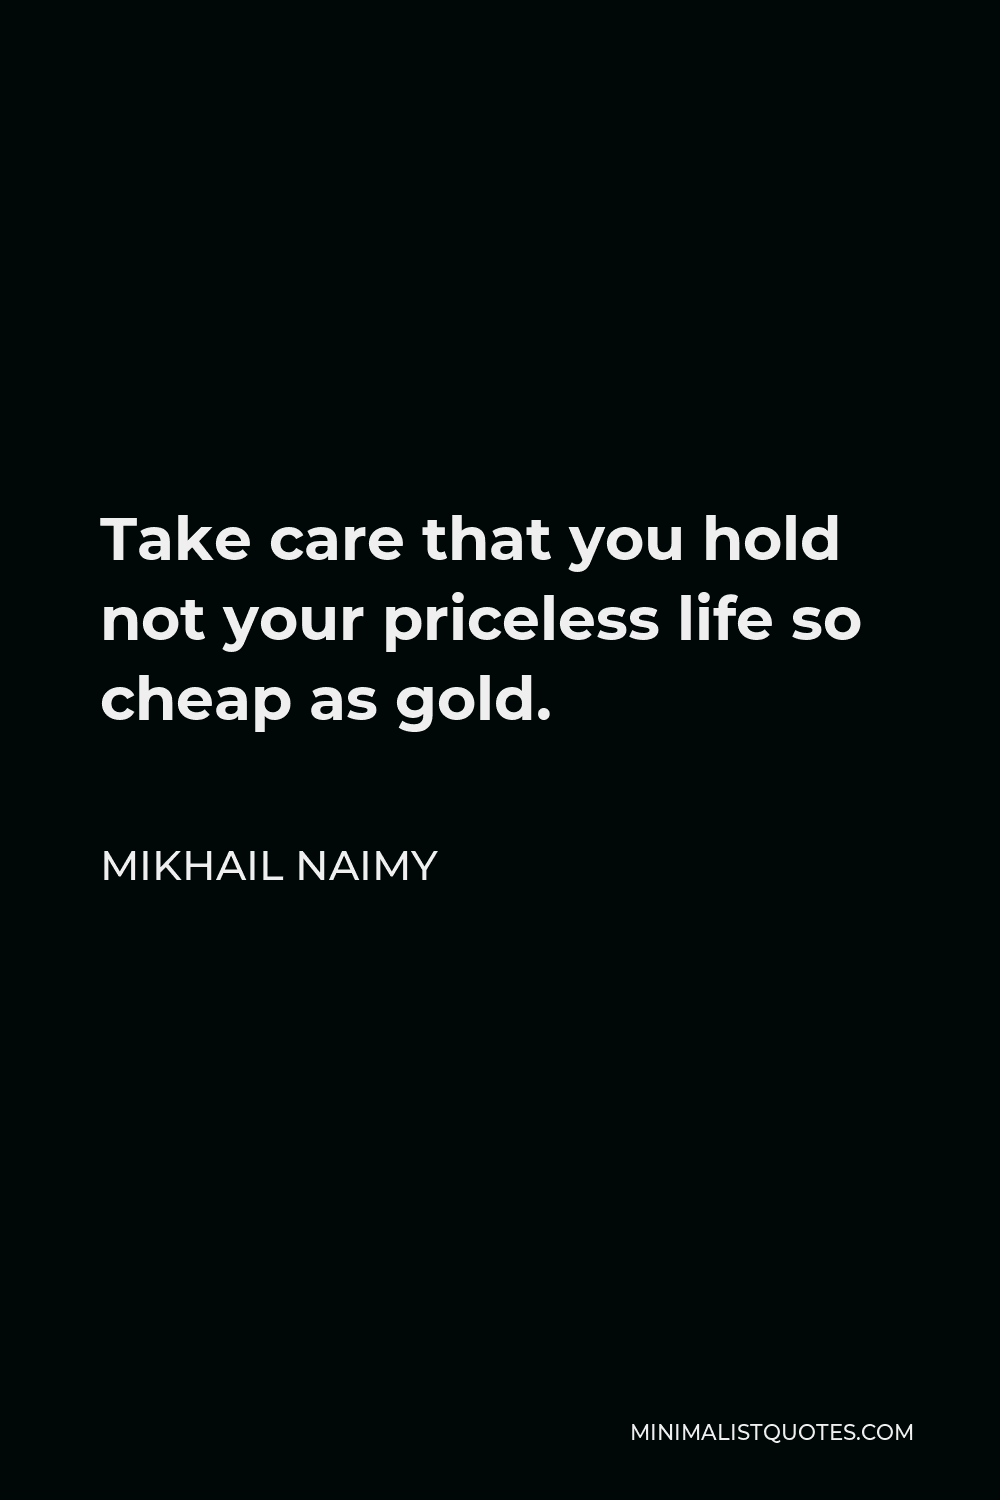 Mikhail Naimy Quote - Take care that you hold not your priceless life so cheap as gold.